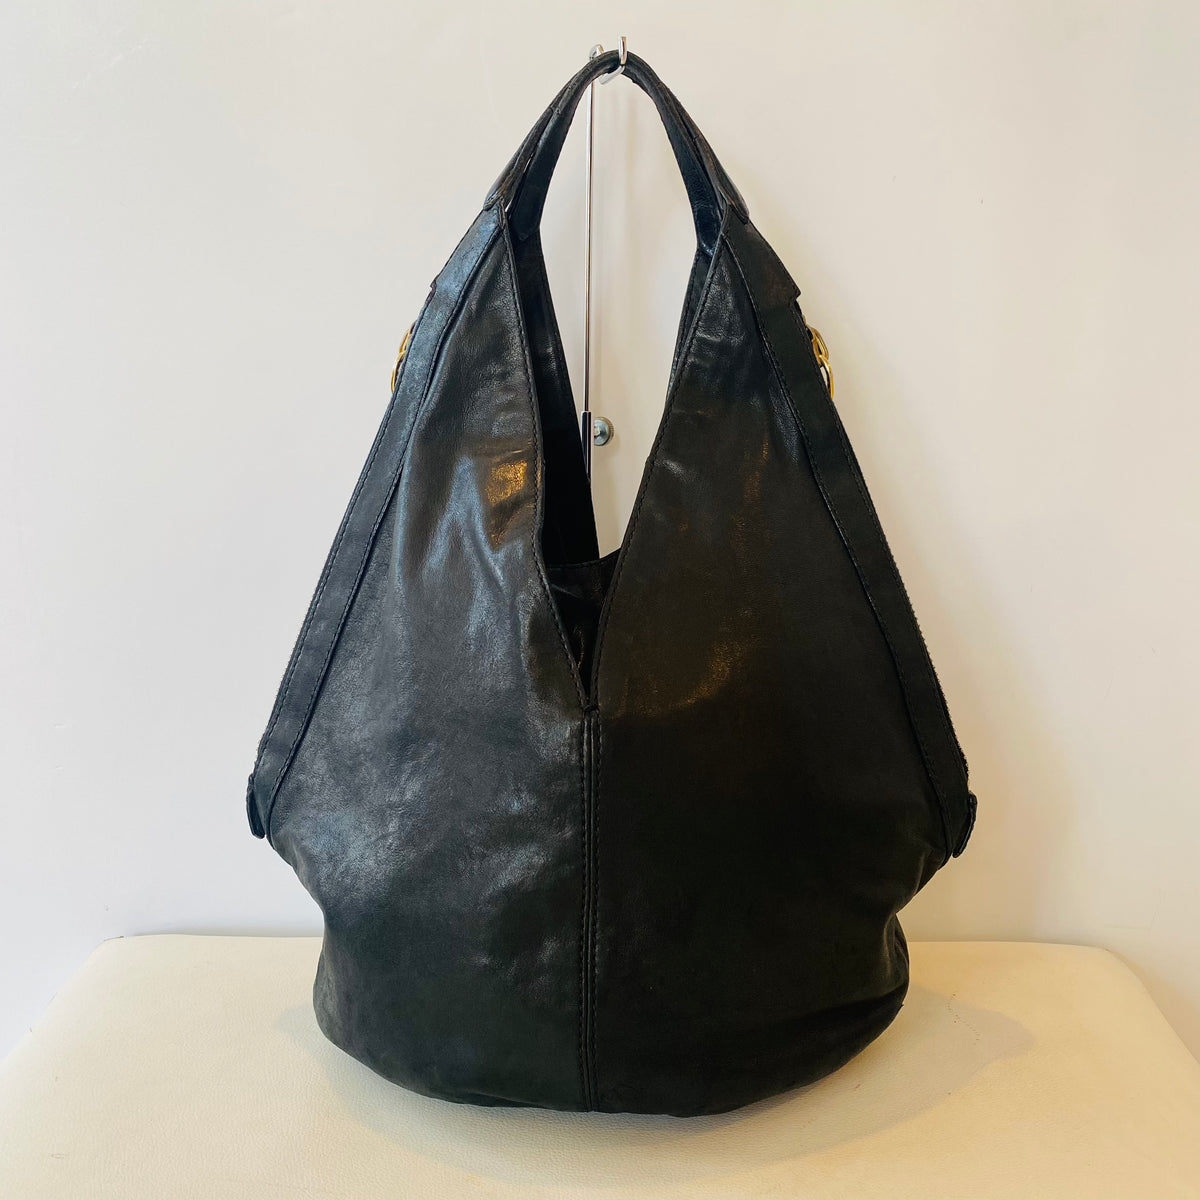 Givenchy Brown/Black Monogram Canvas and Patent Leather Hobo